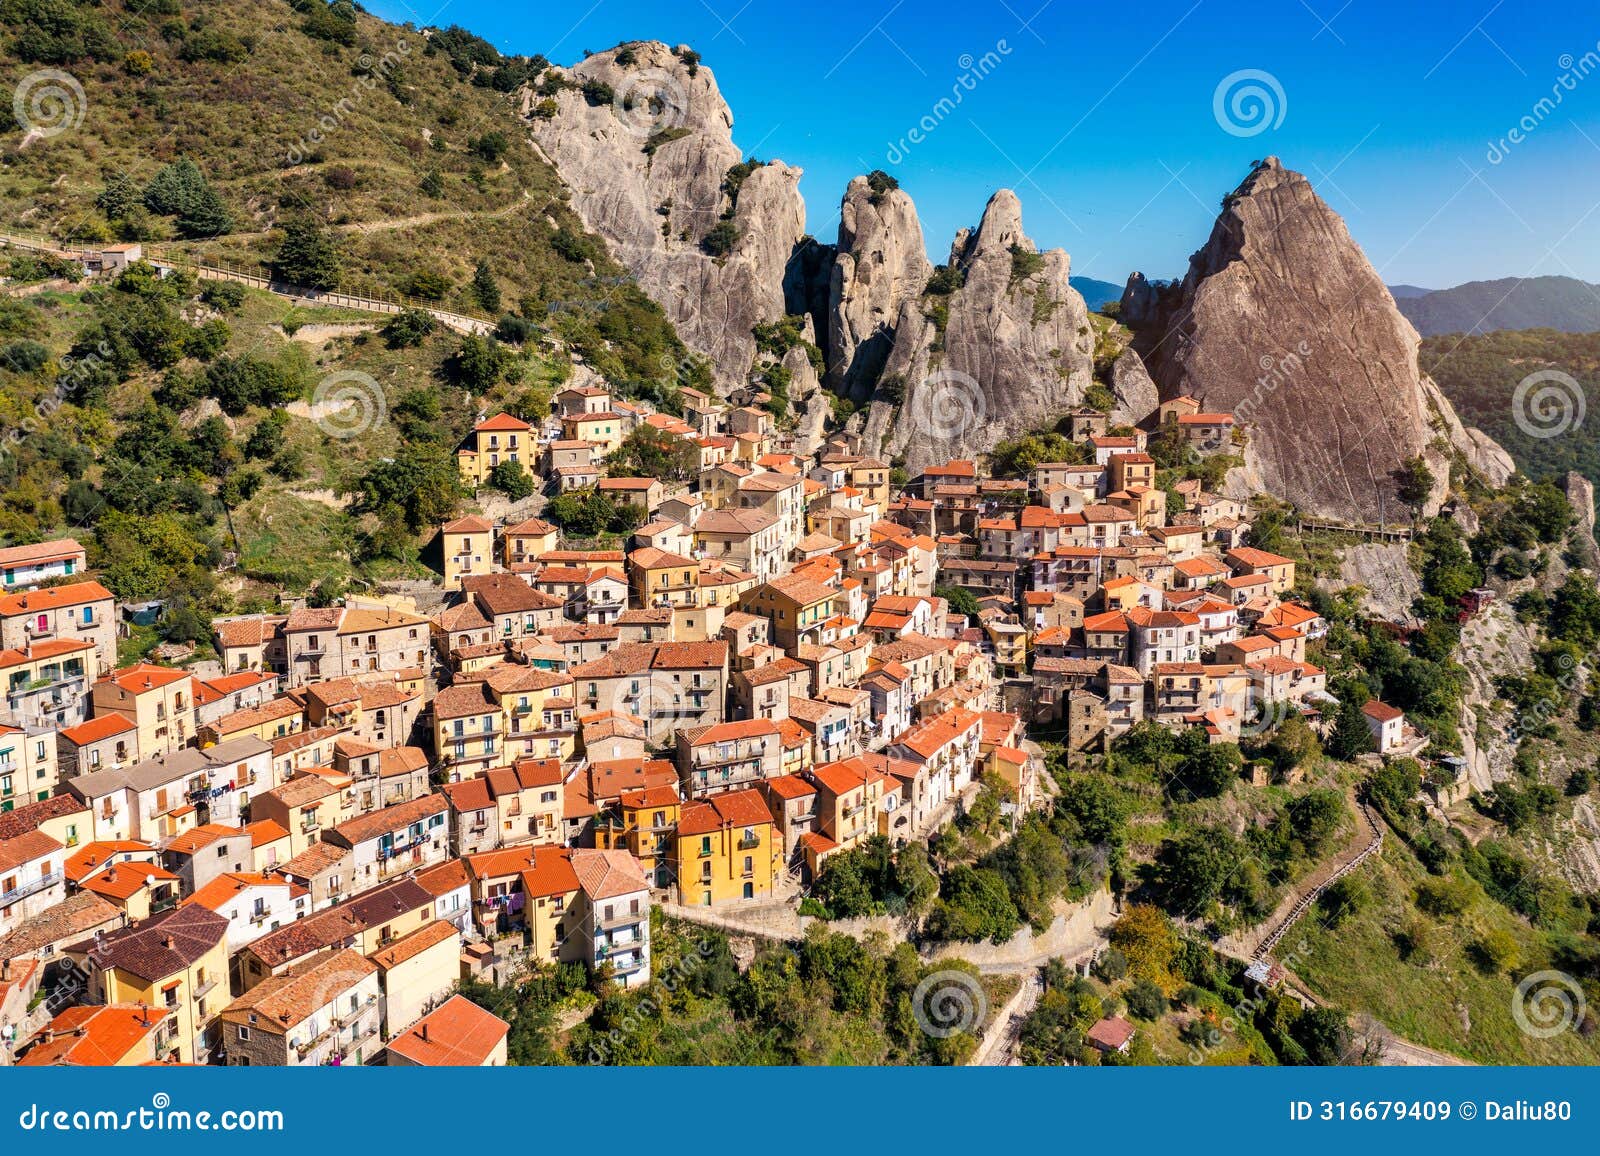 the picturesque village of castelmezzano, province of potenza, basilicata, italy. cityscape aerial view of medieval city of